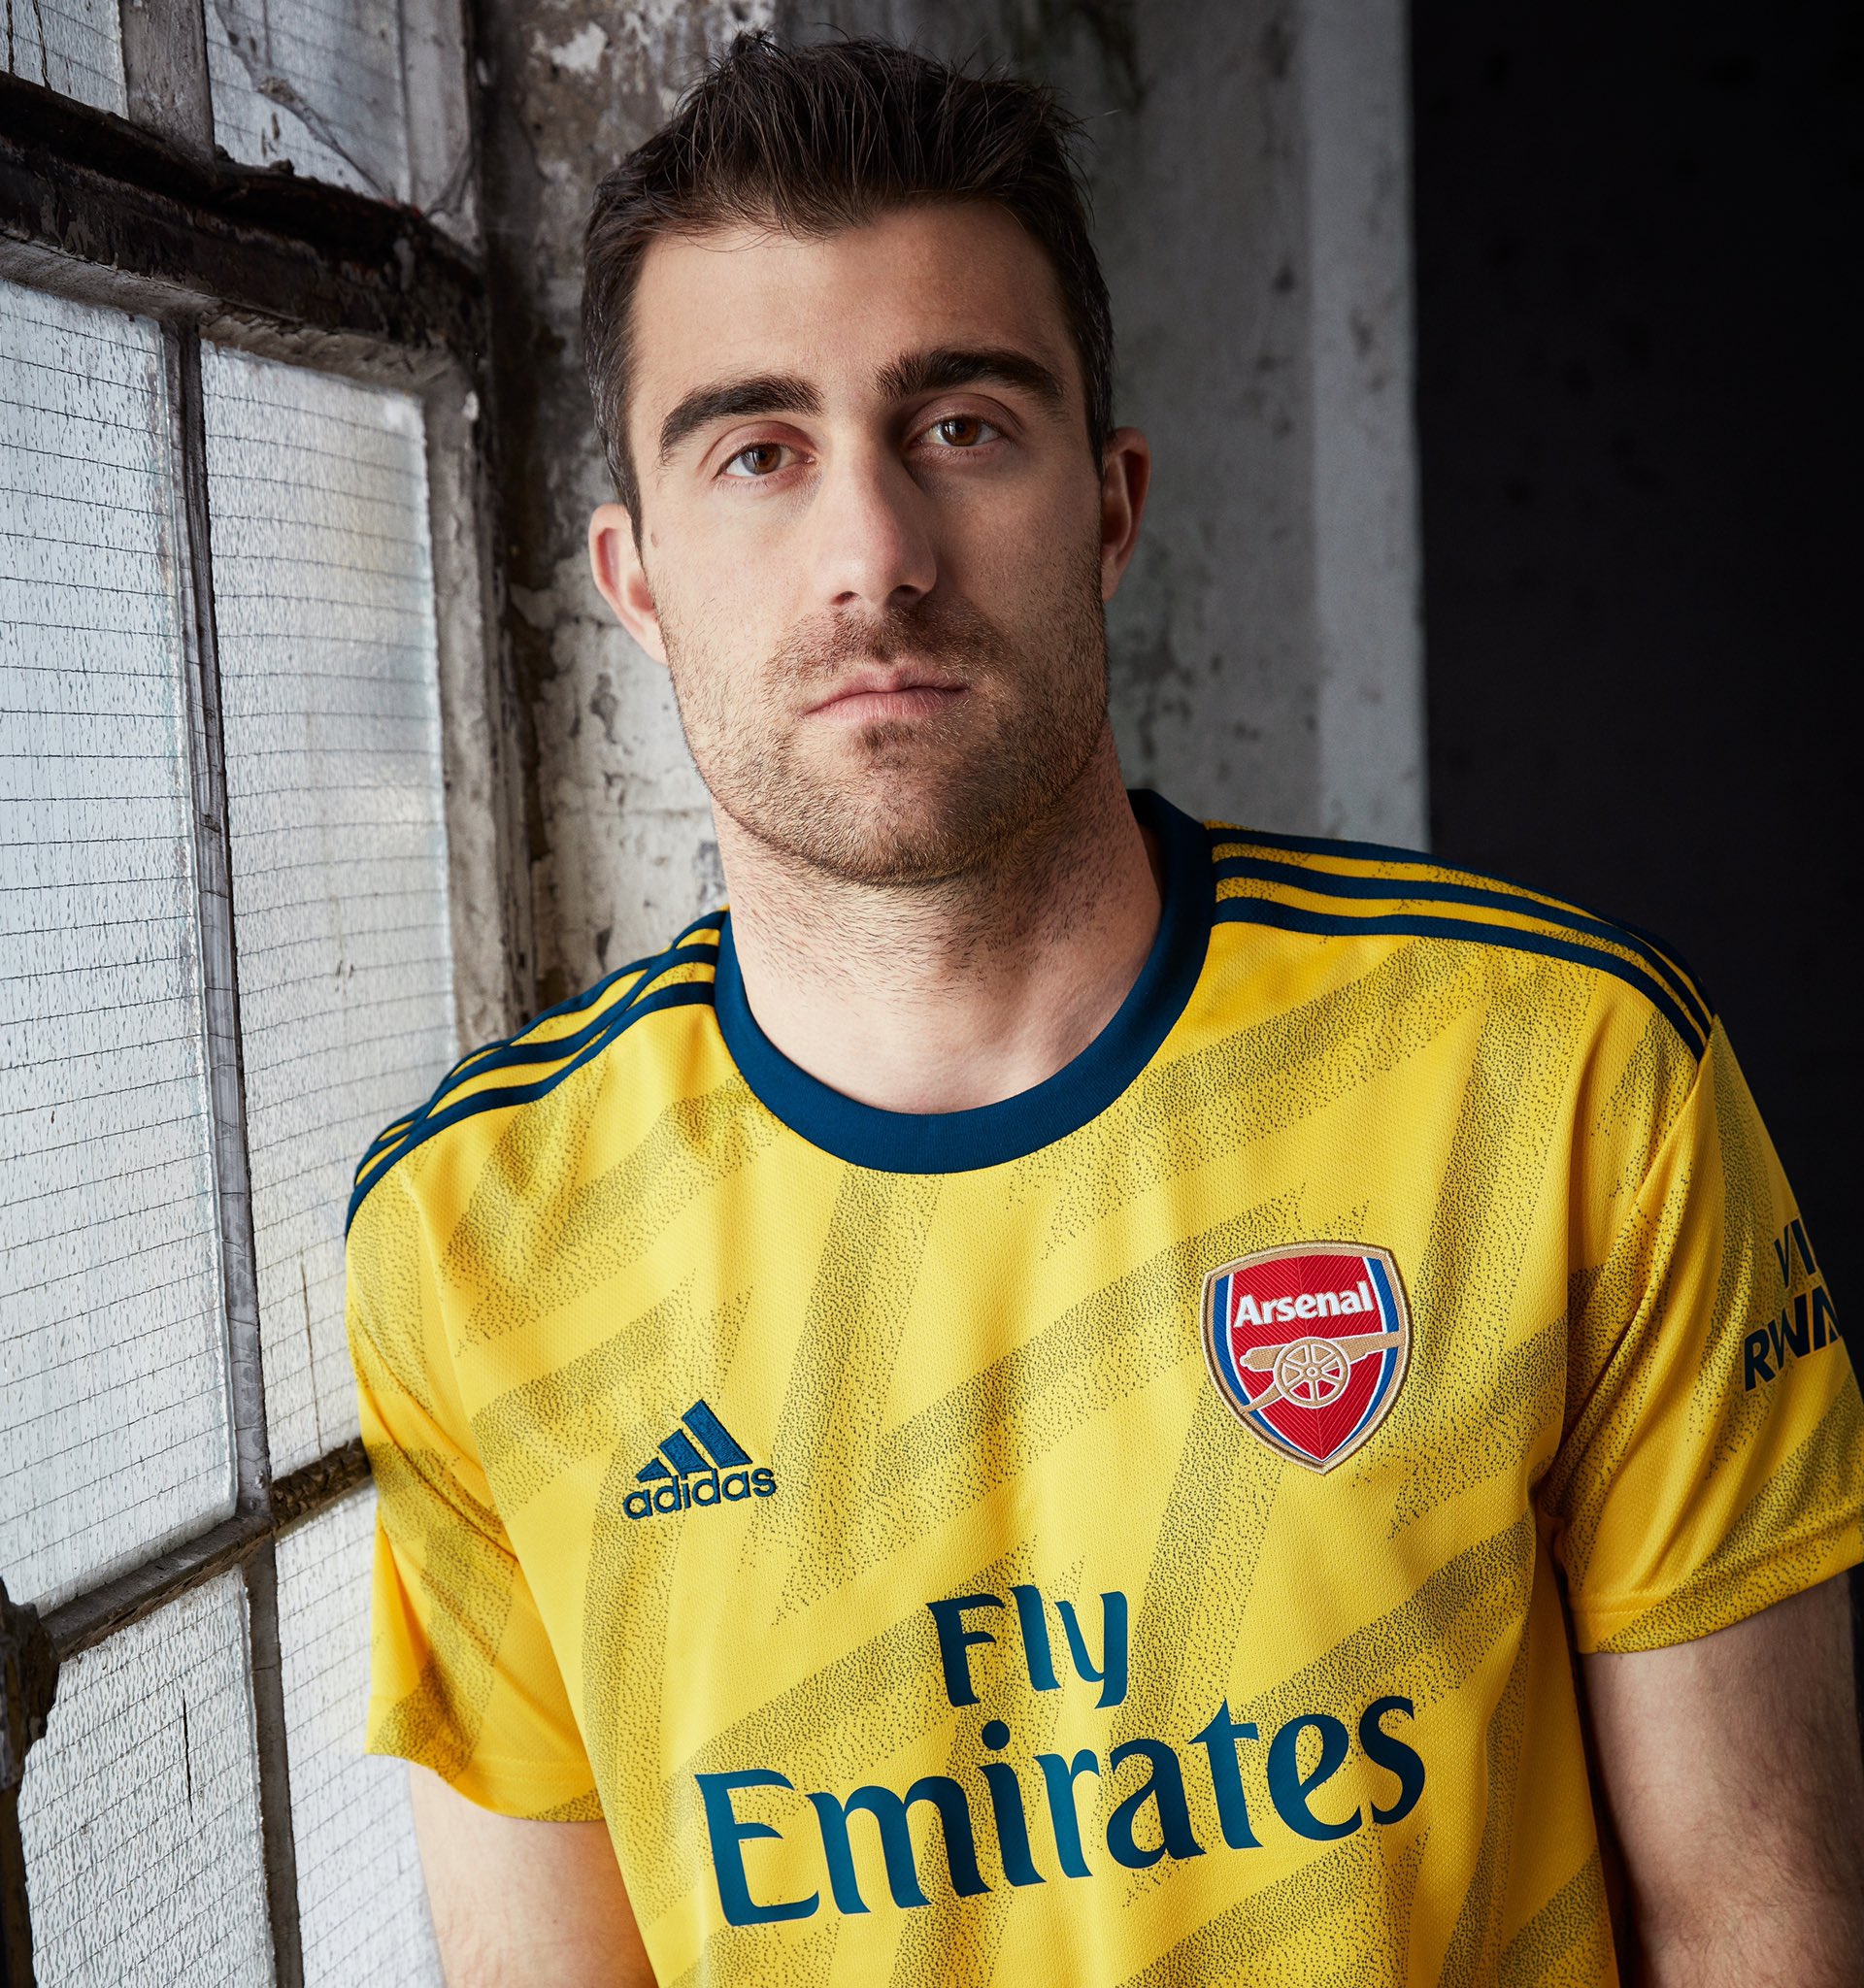 Modern Arsenal players in the 'bruised banana' Adidas kit will